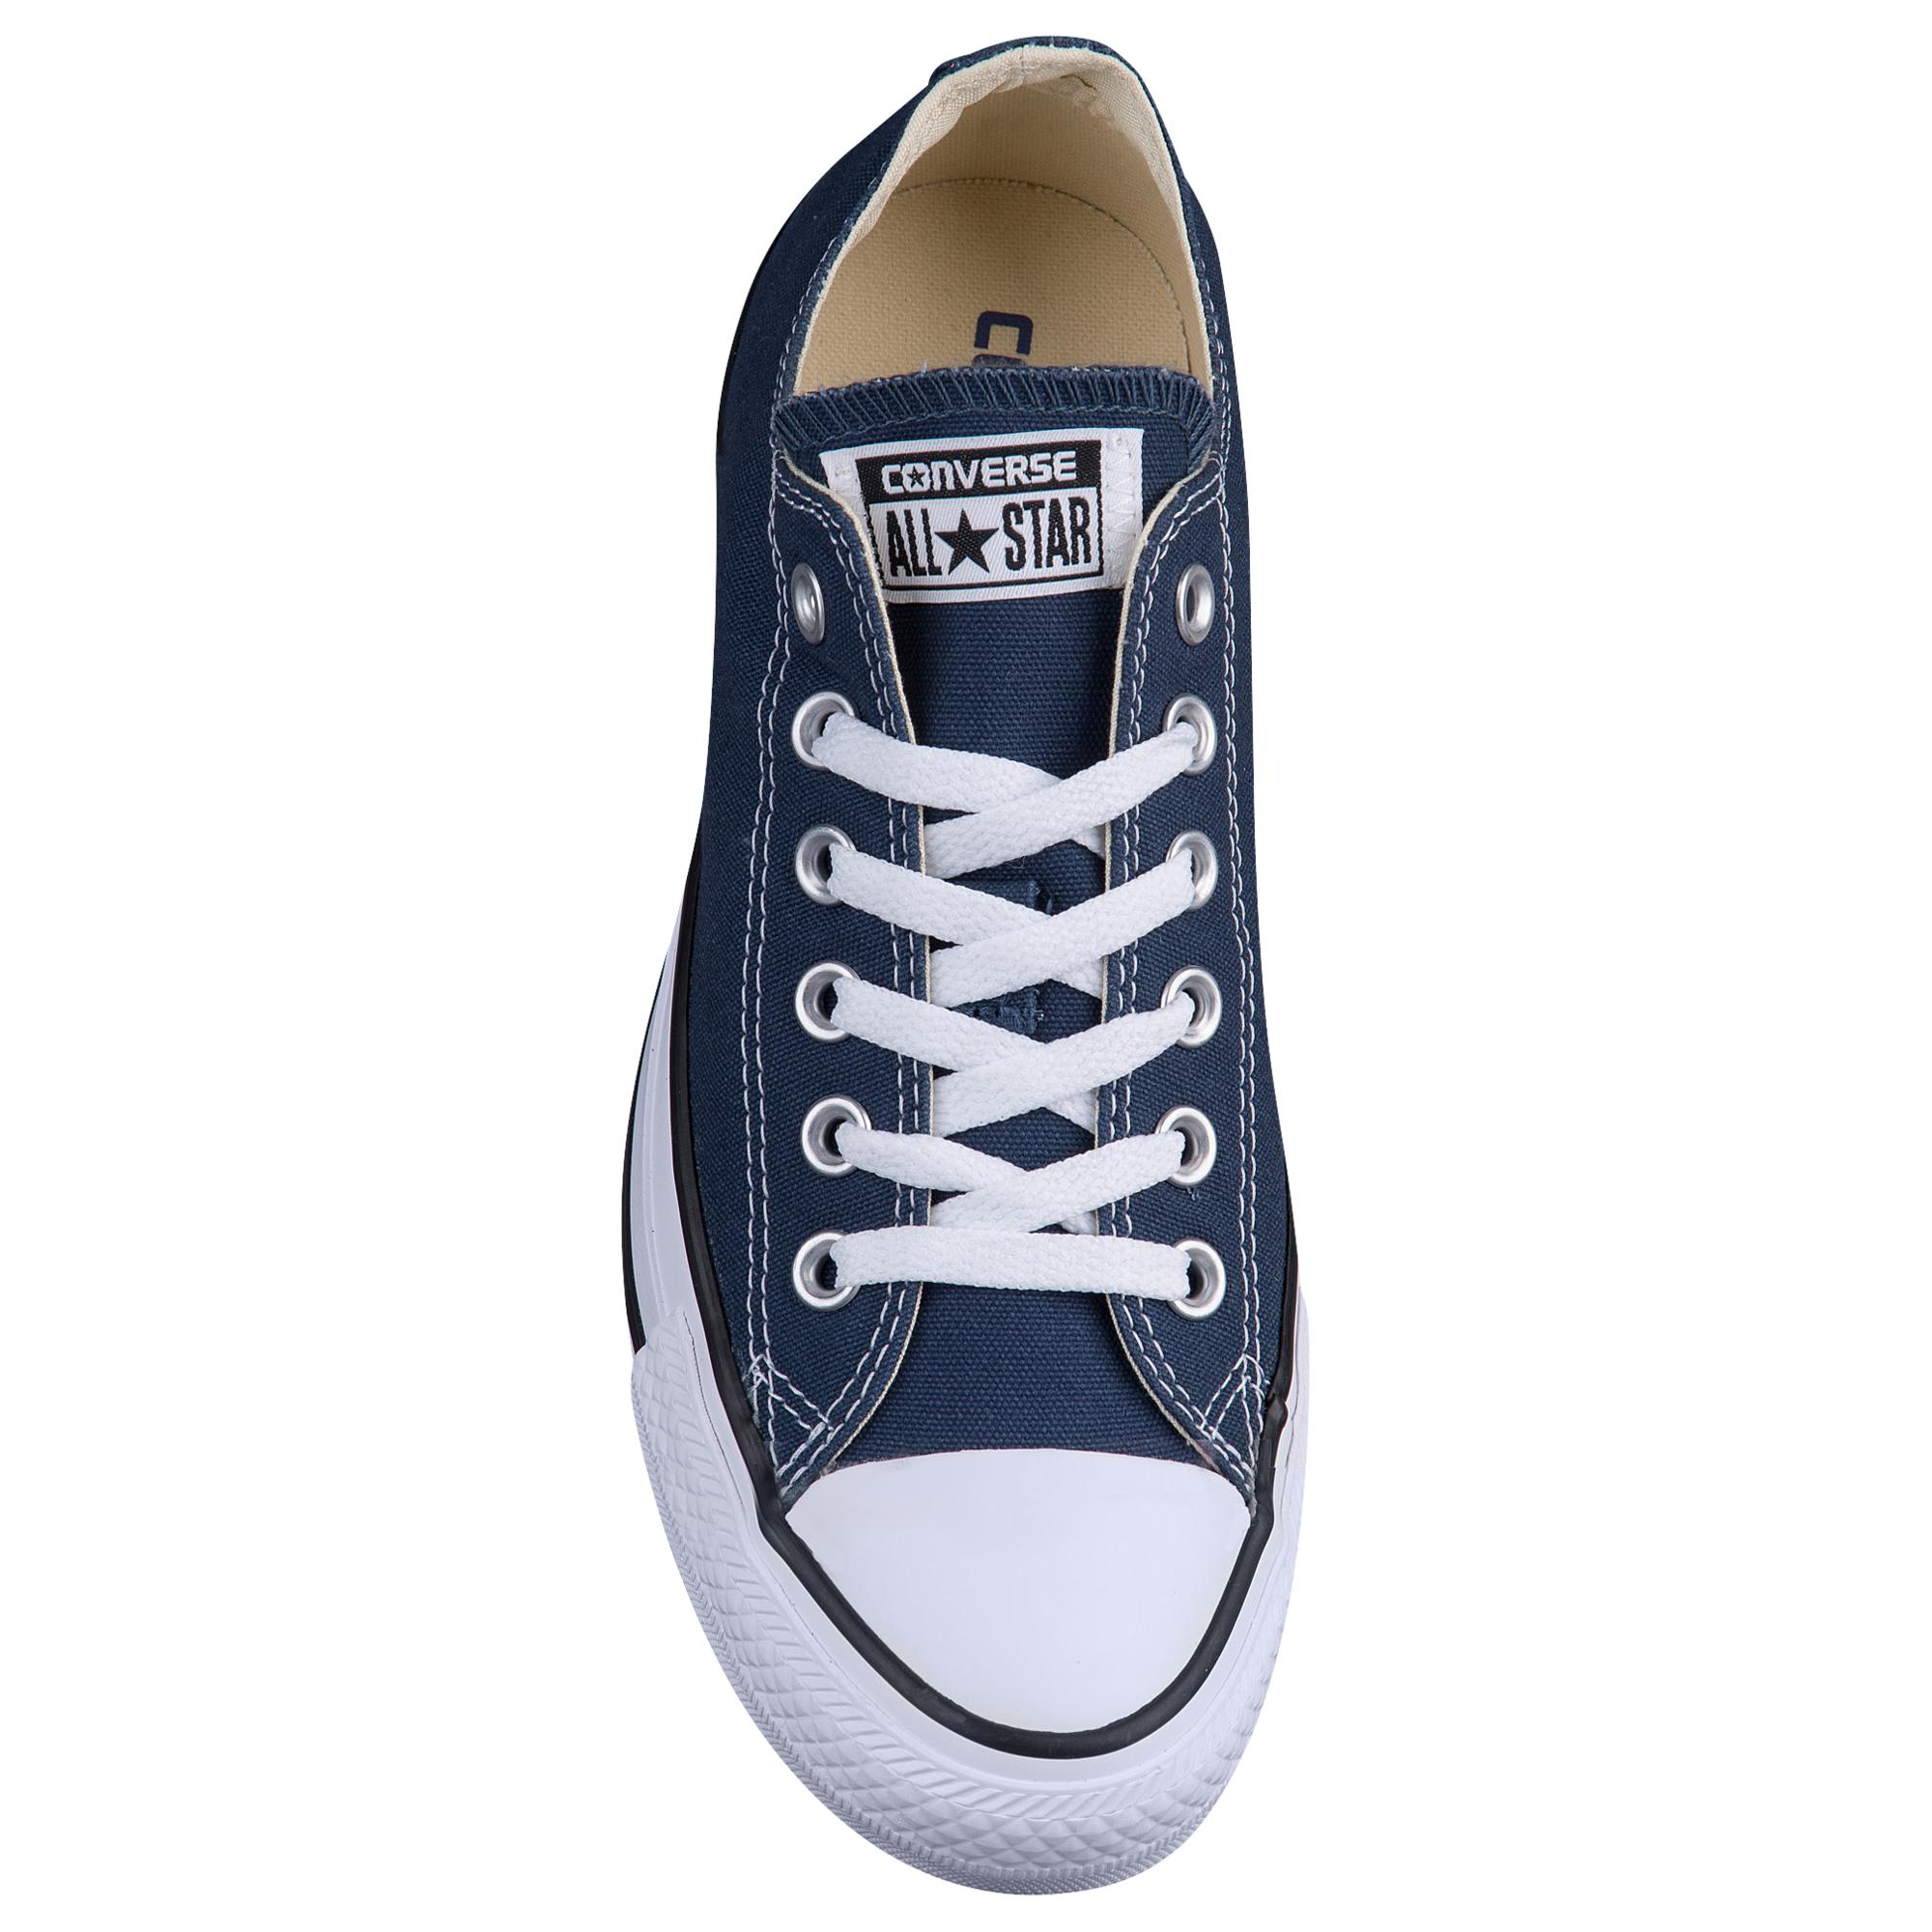 Converse Canvas All Star Ox Basketball Shoes in Navy (Blue) - Lyst